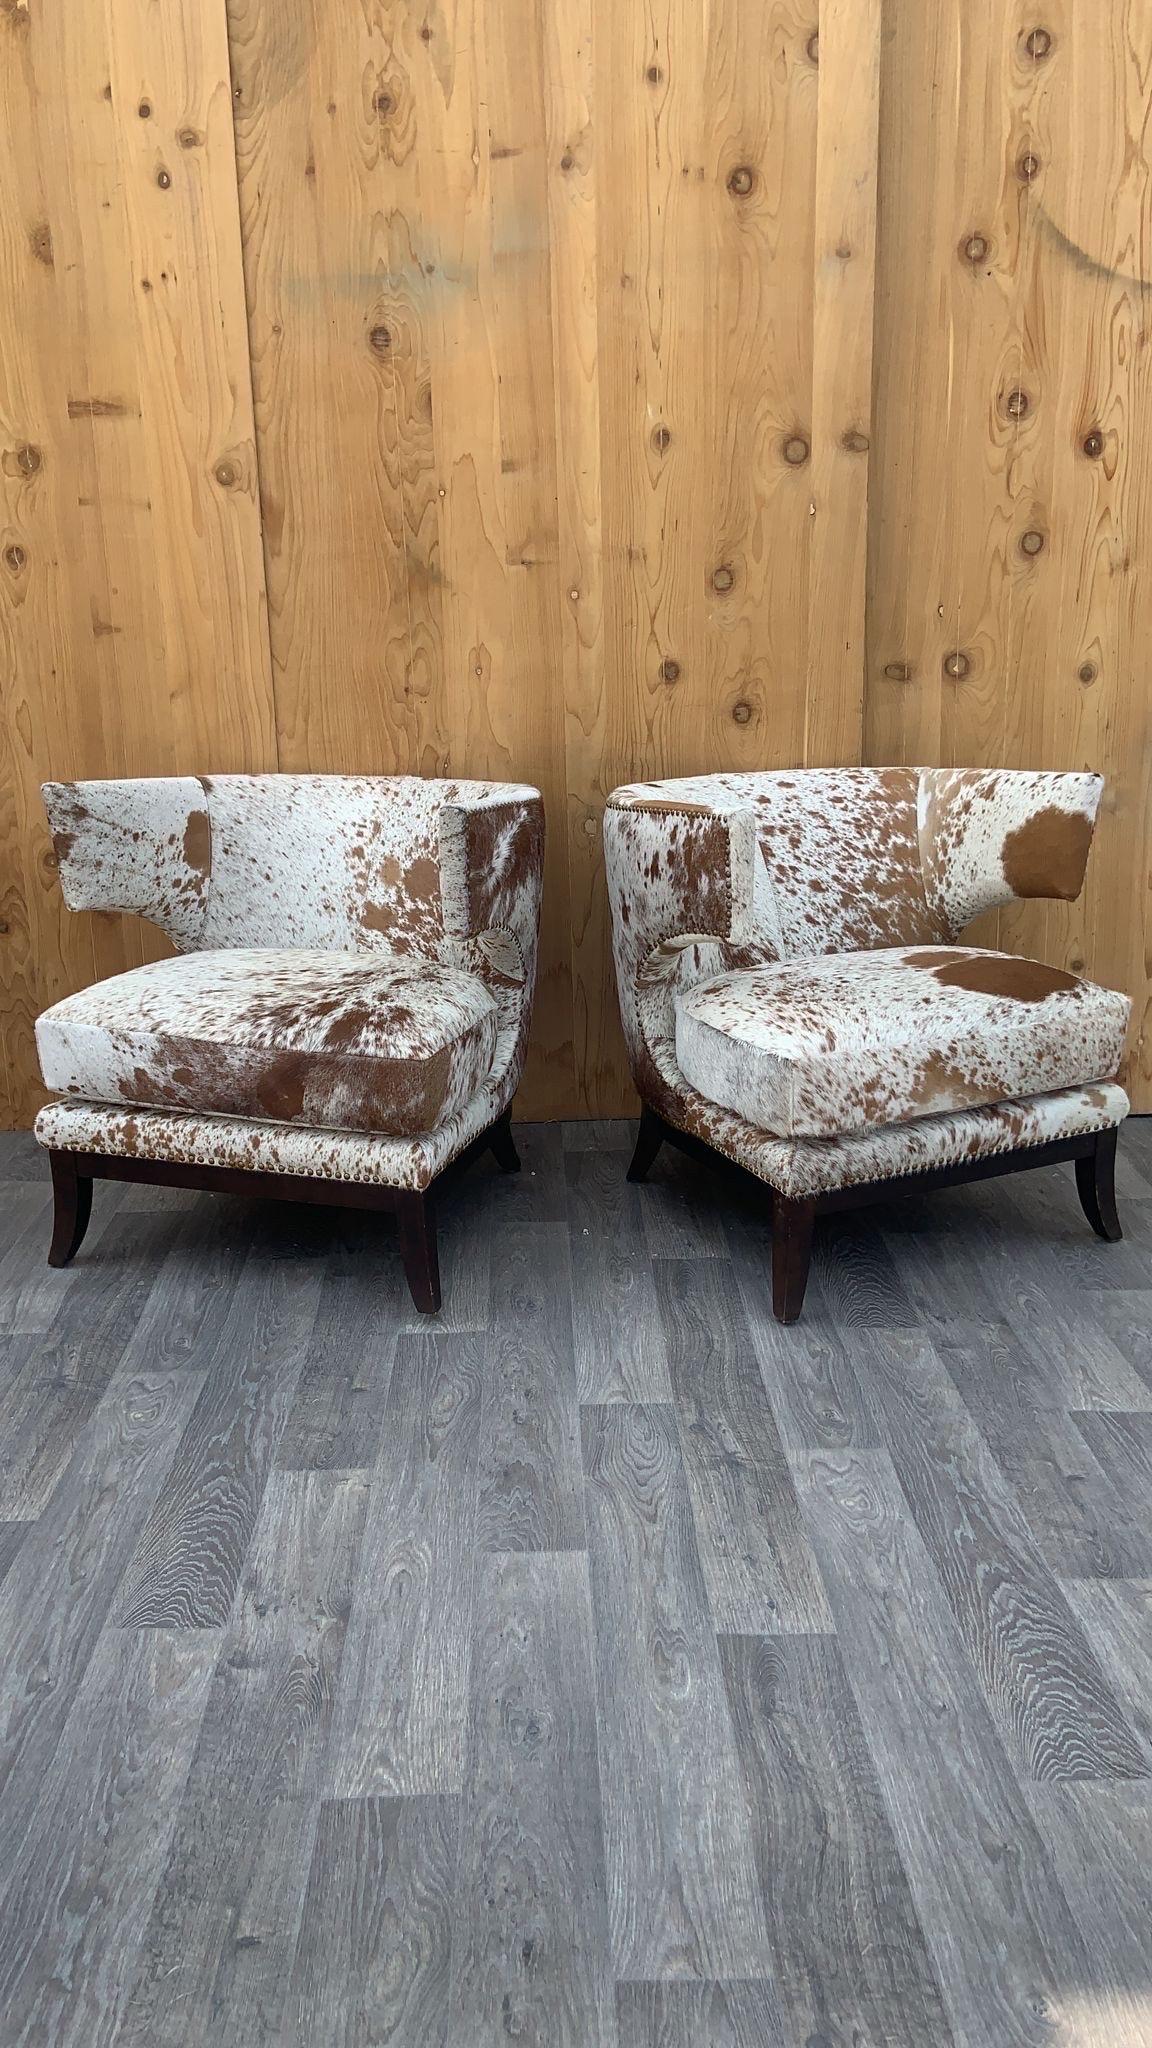 American English Horseshoe Savoy Chairs Newly Upholstered in Brazilian Cowhide - Set of 2